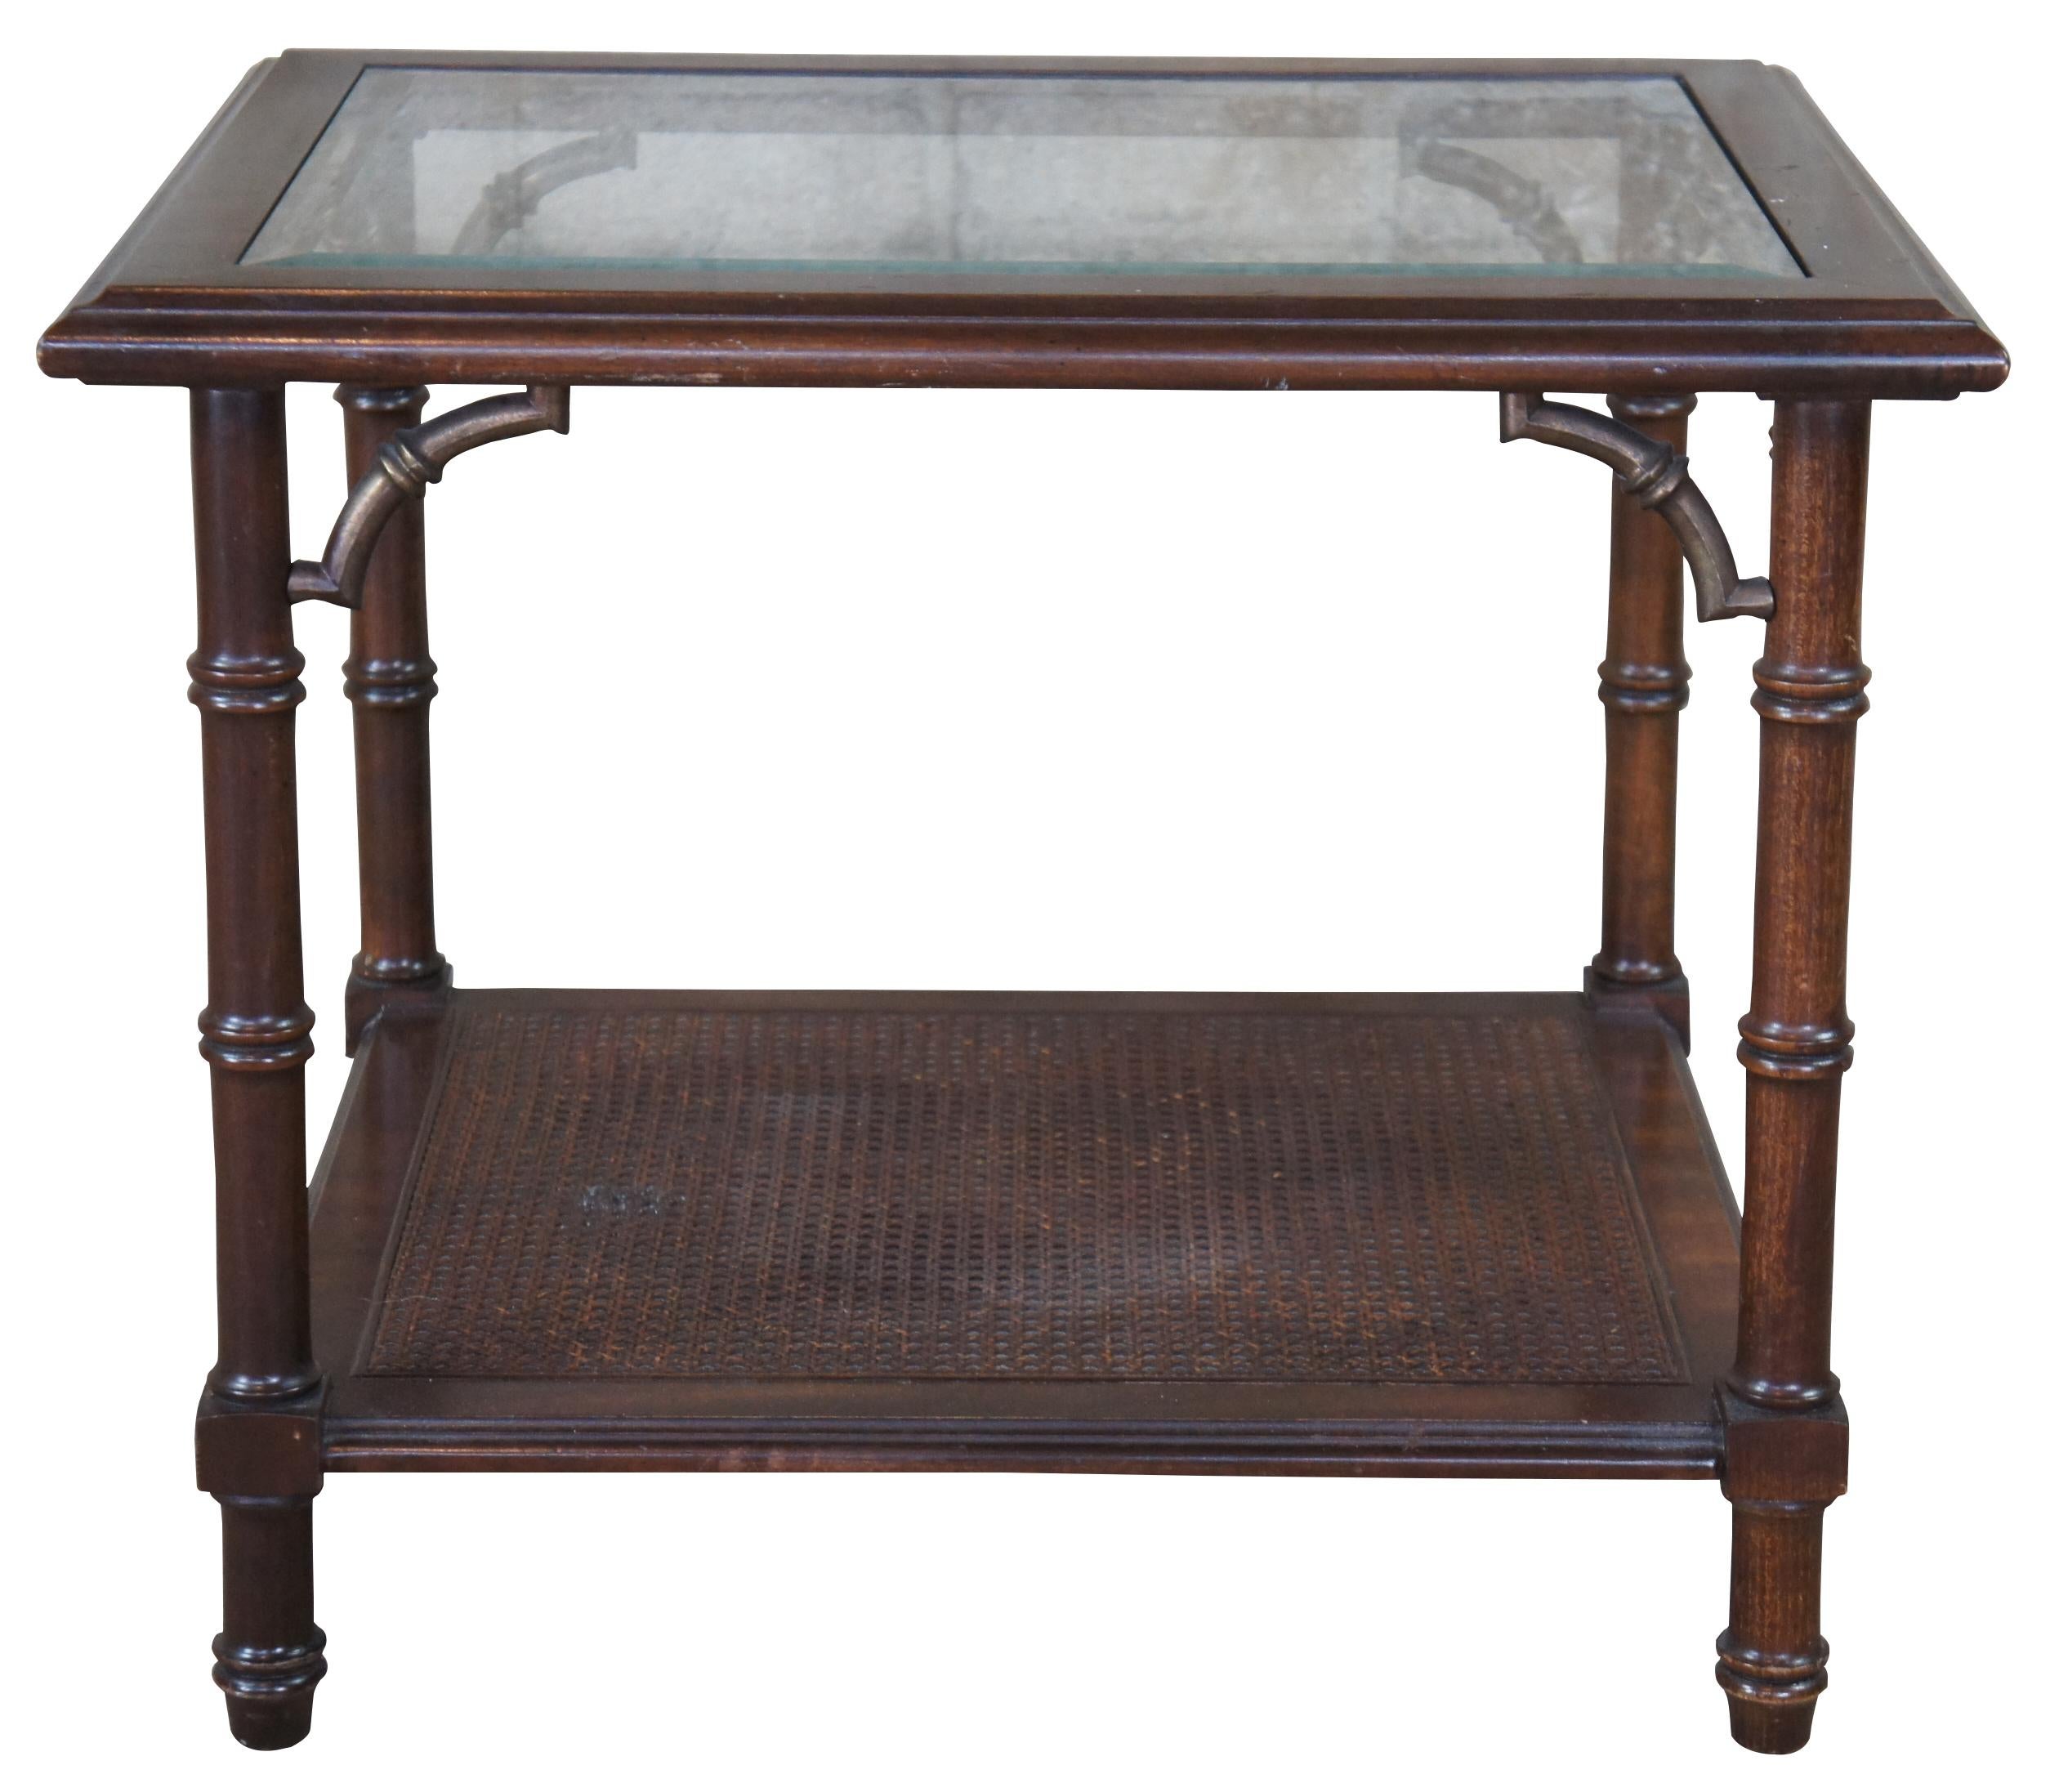 Vintage lane Altavista two tier side, end or accent table. Made of walnut featuring faux bamboo styling with beveled glass inset top and caned wicker lower tier. Modern Chinoiserie. 1366-05.
 